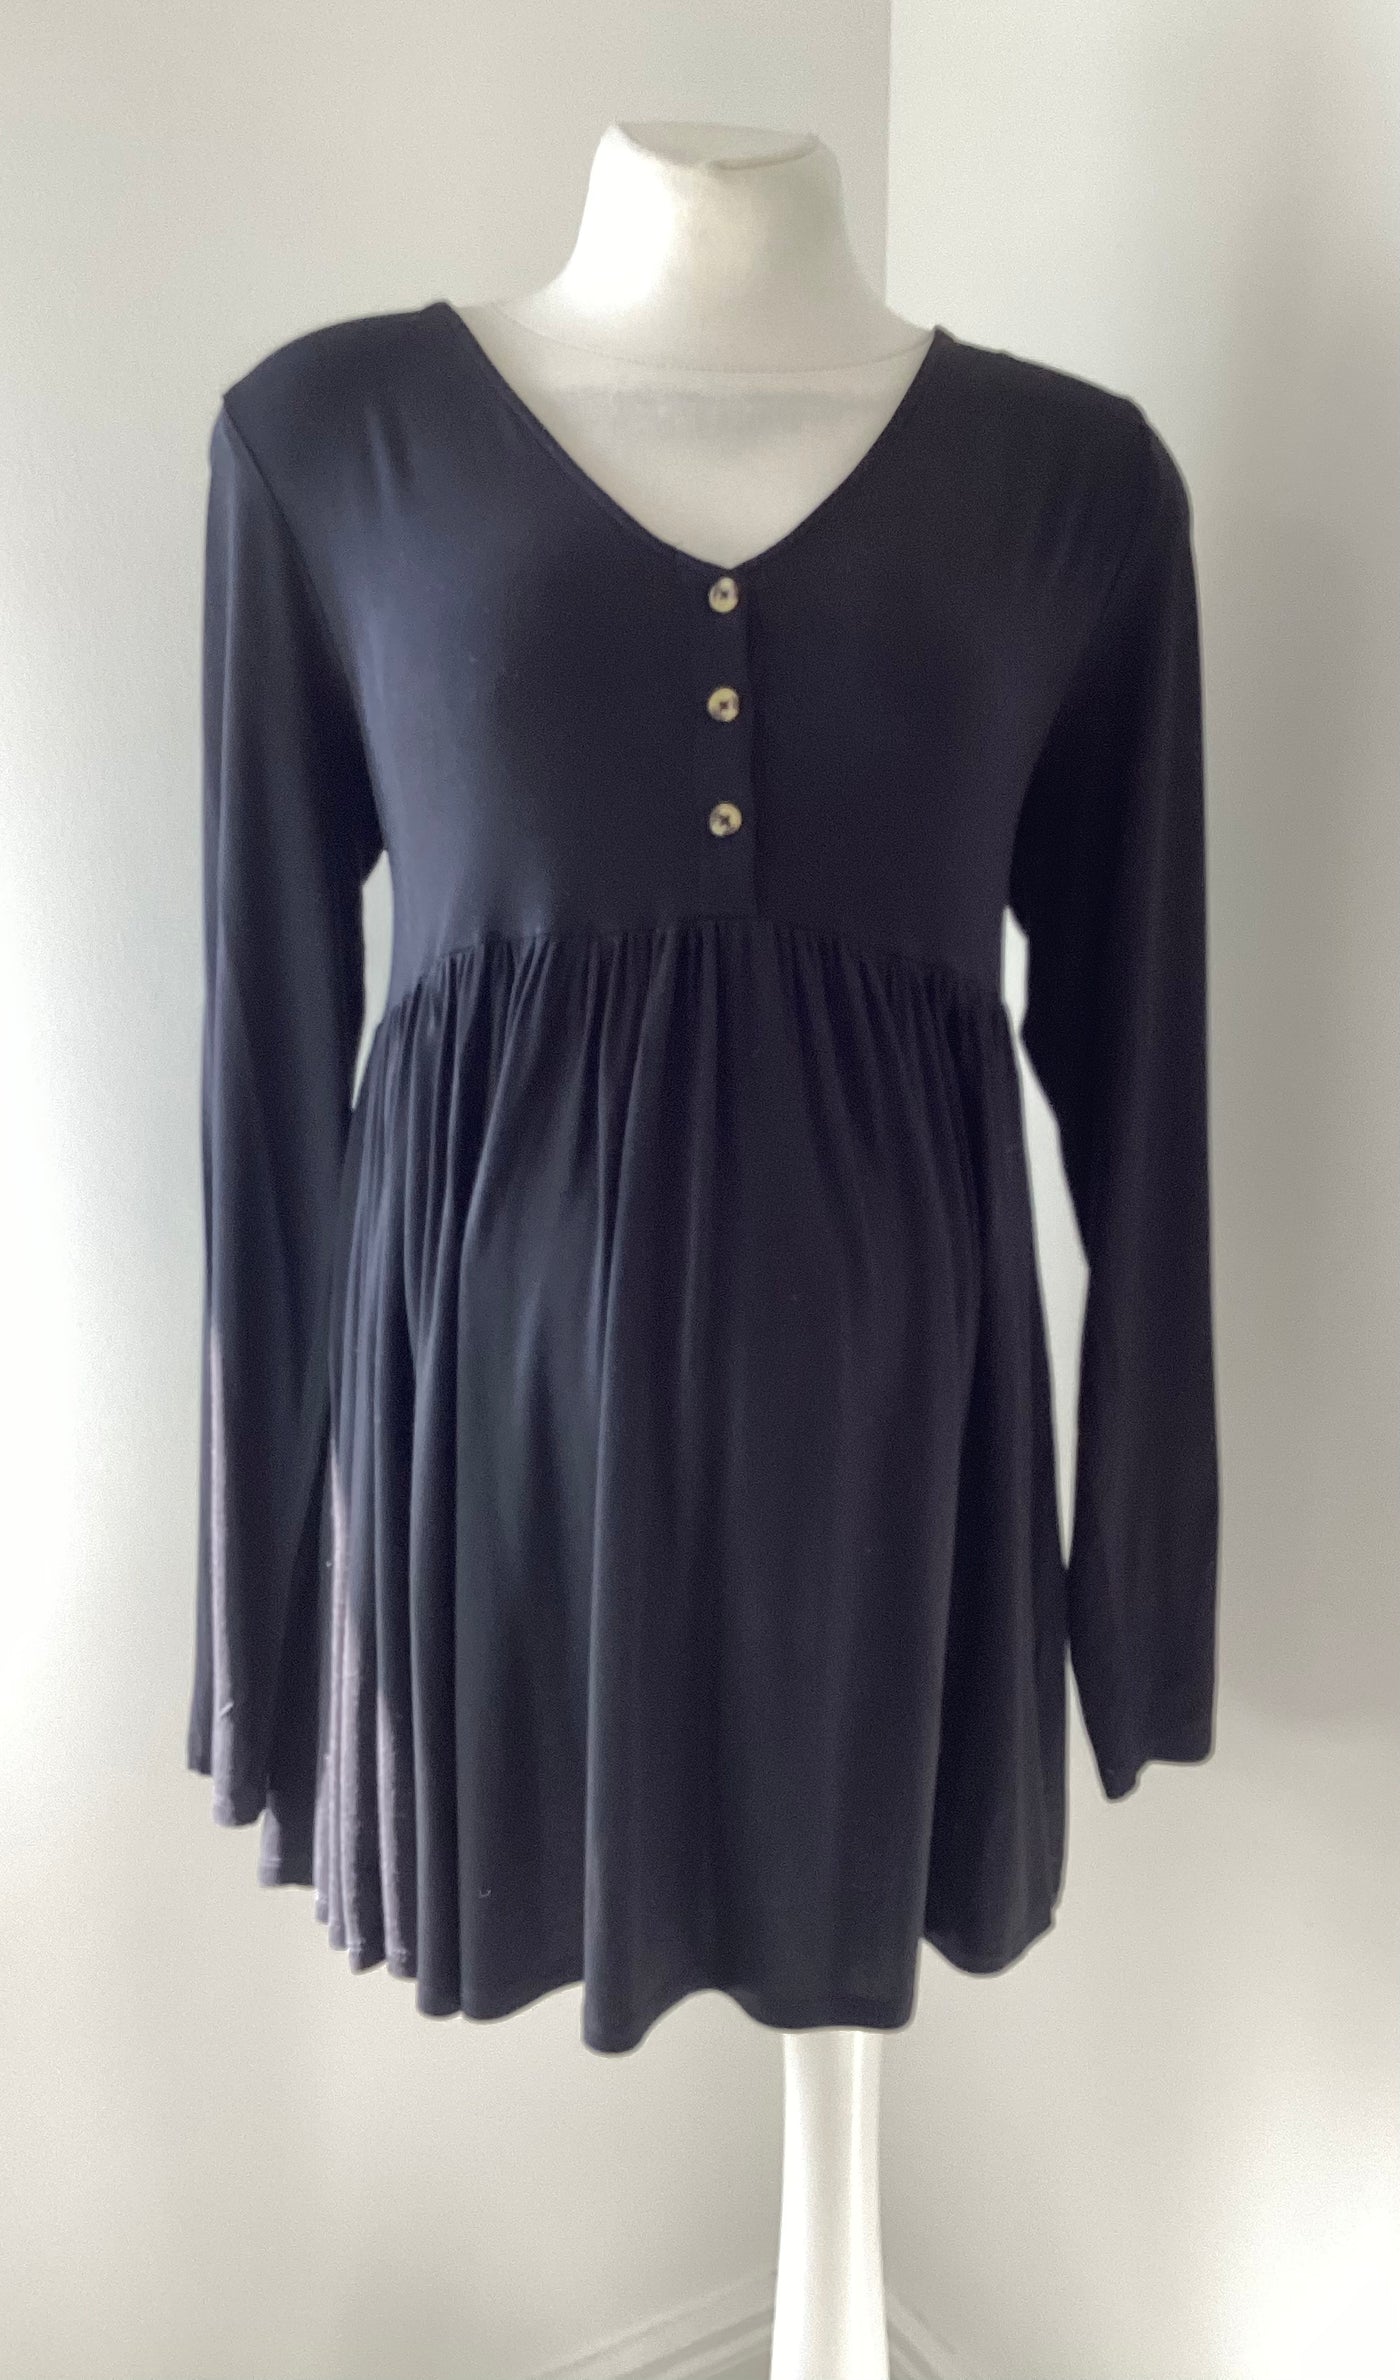 New Look Maternity black half button front top - Size 14